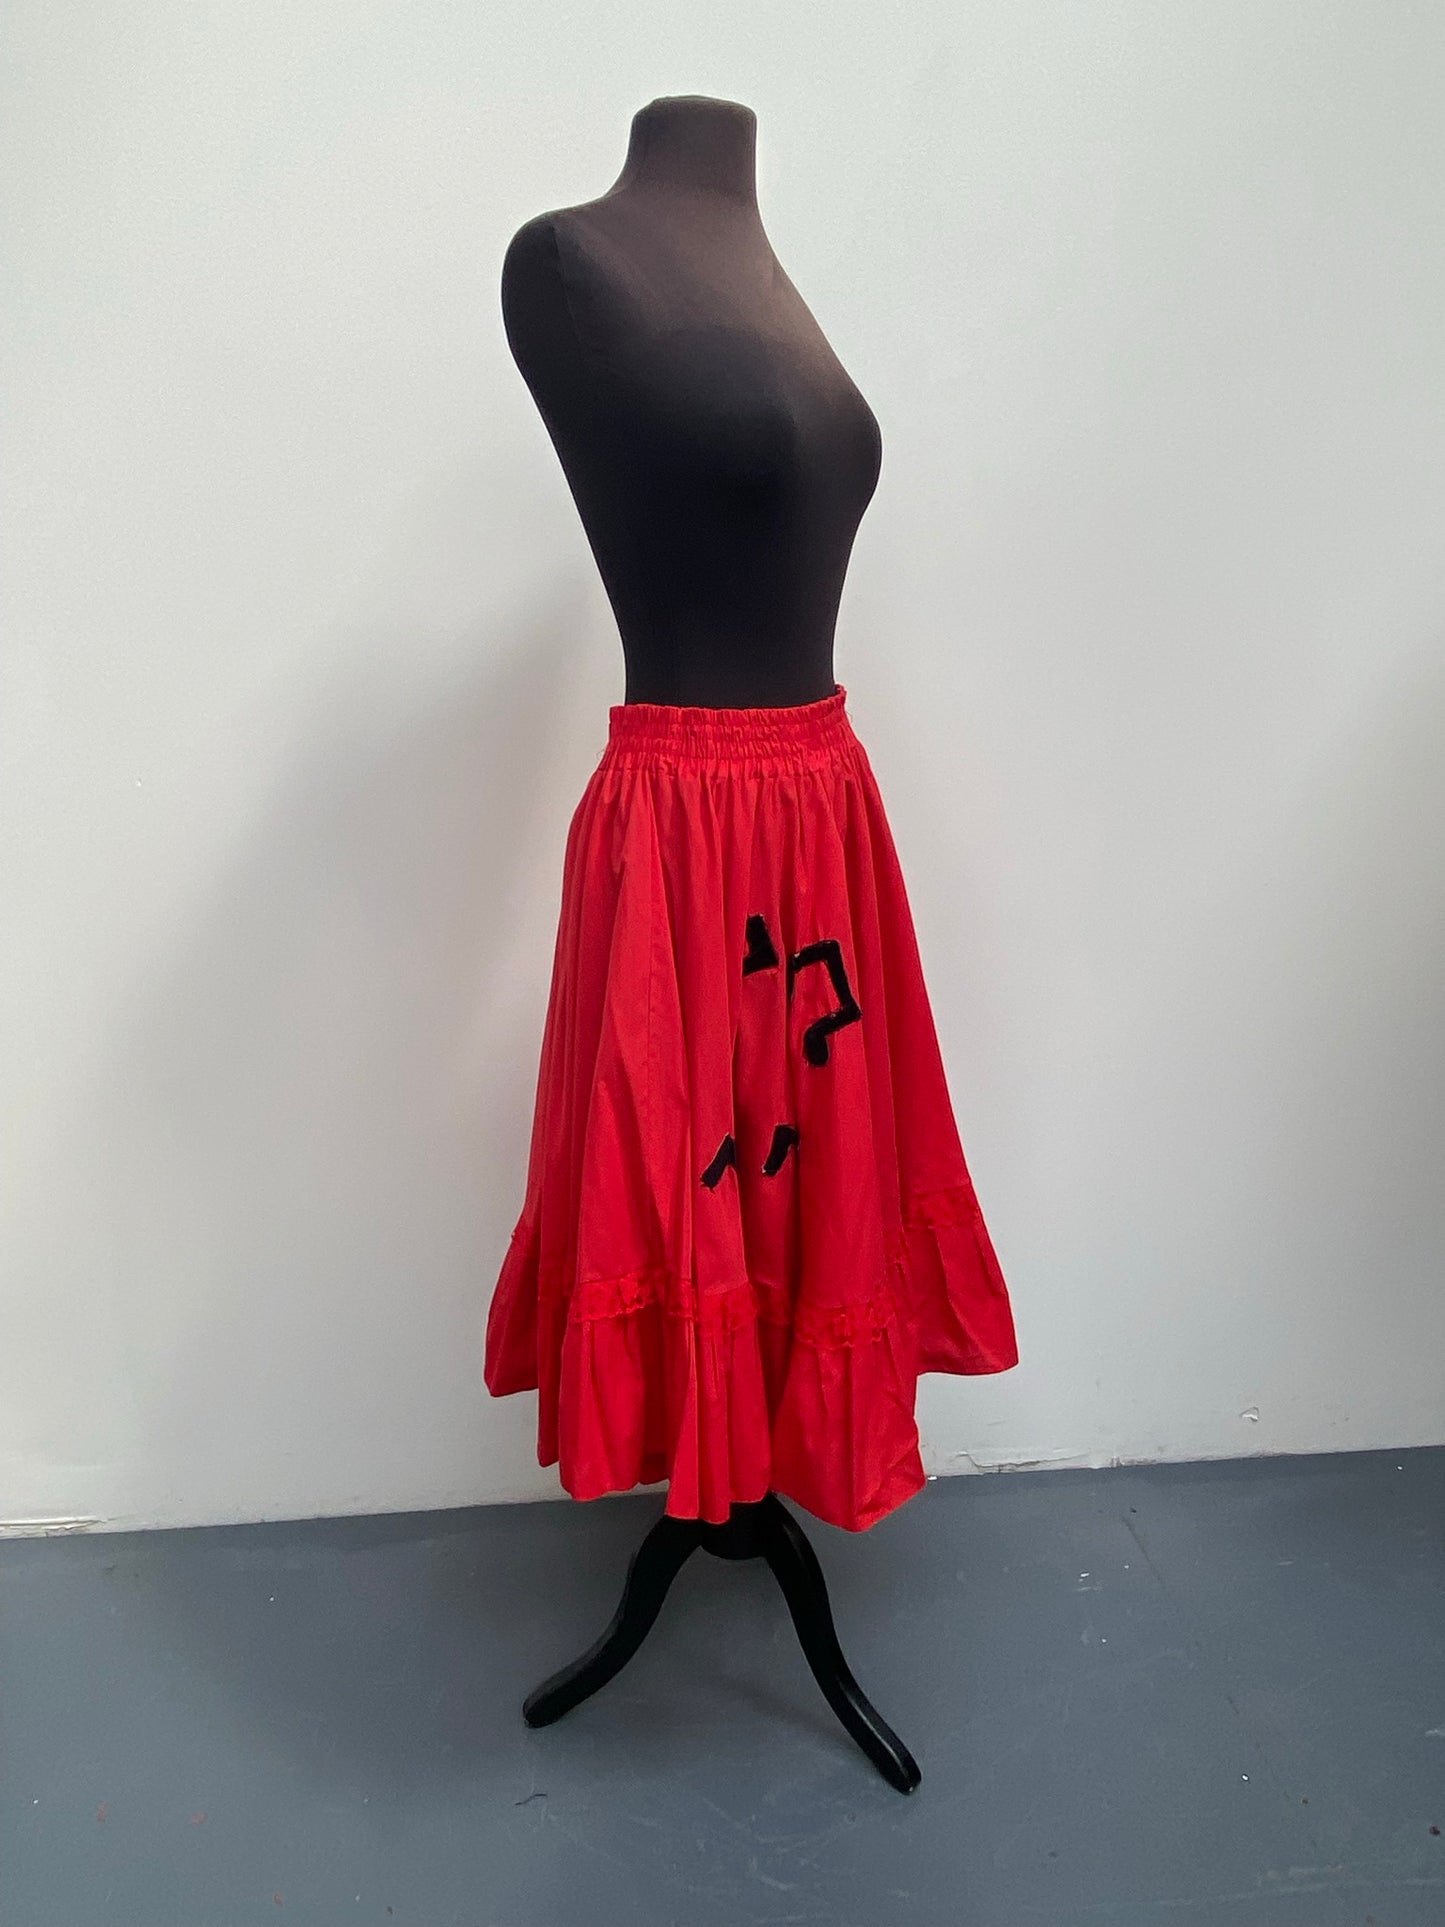 50s Red Skirt Size with Music notes Size 14-16 - Ex Hire Fancy Dress Costume